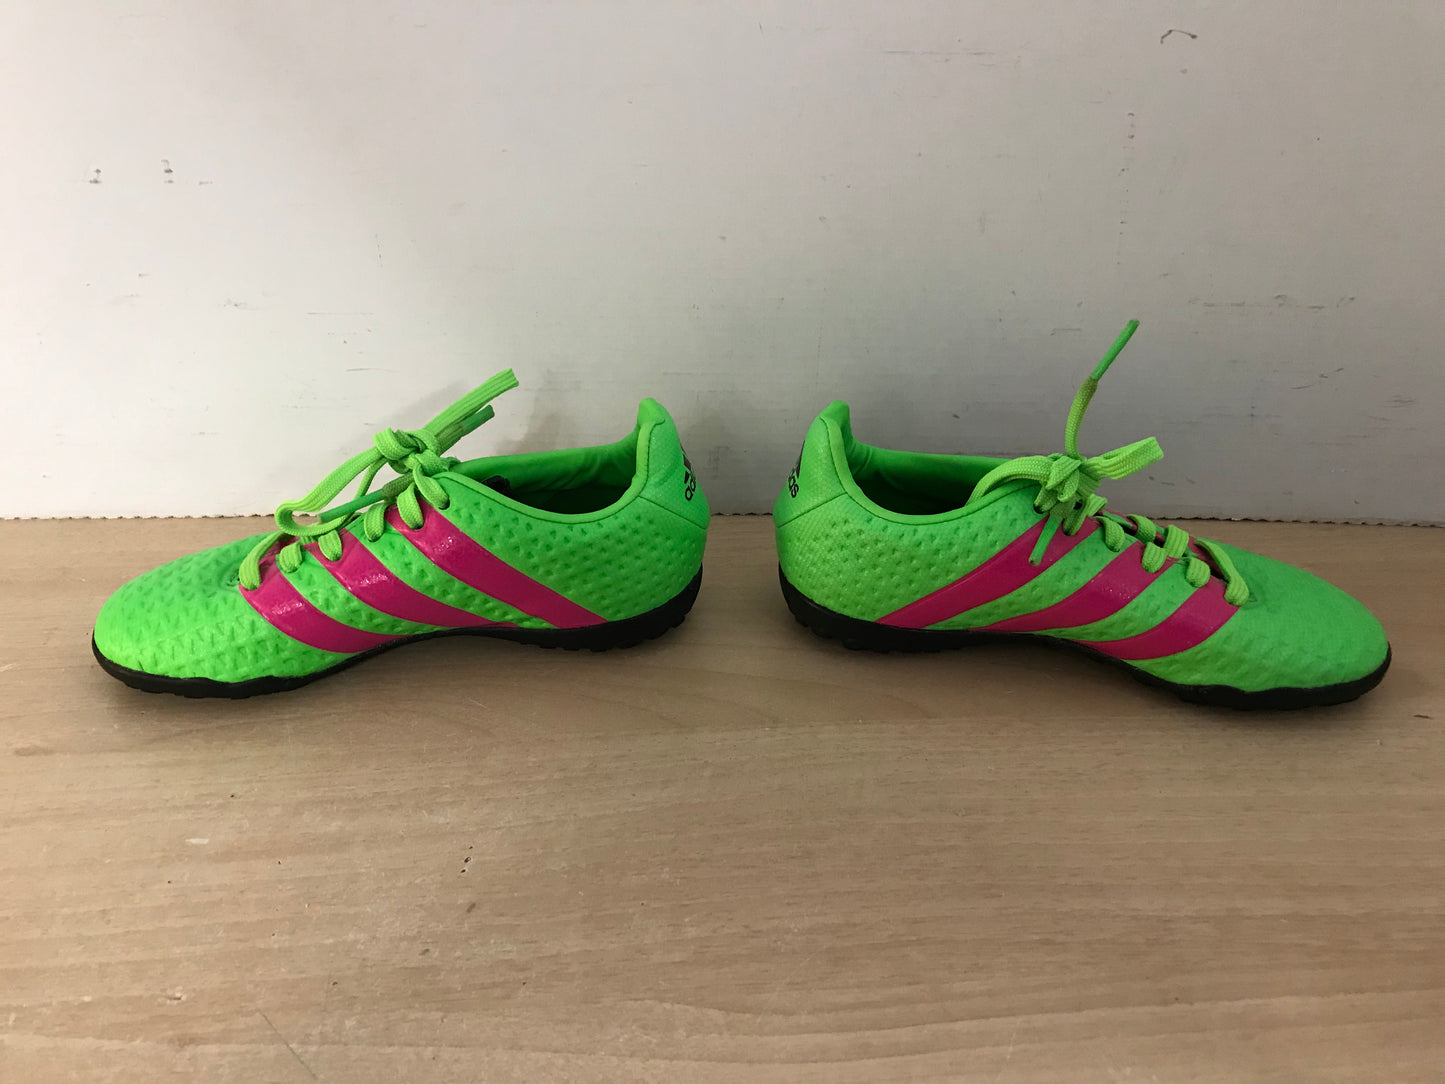 Soccer Shoes Cleats Indoor Child Size 10.5 Adidas Lime Pink As New Excellent